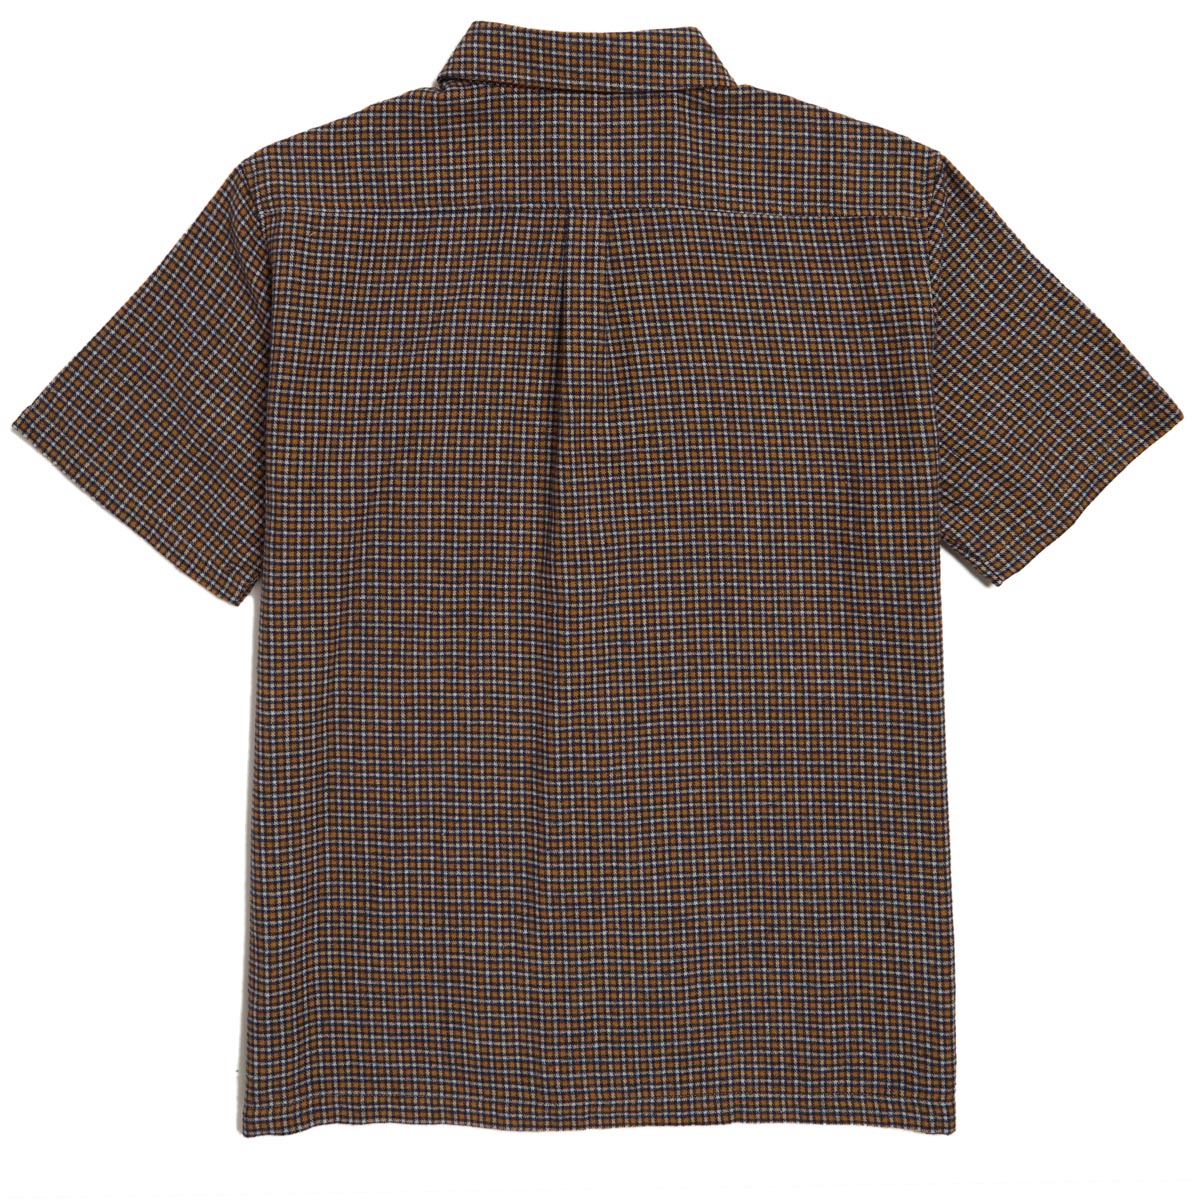 Theories Avignon Flannel Button-Up Shirt - Apricot image 2